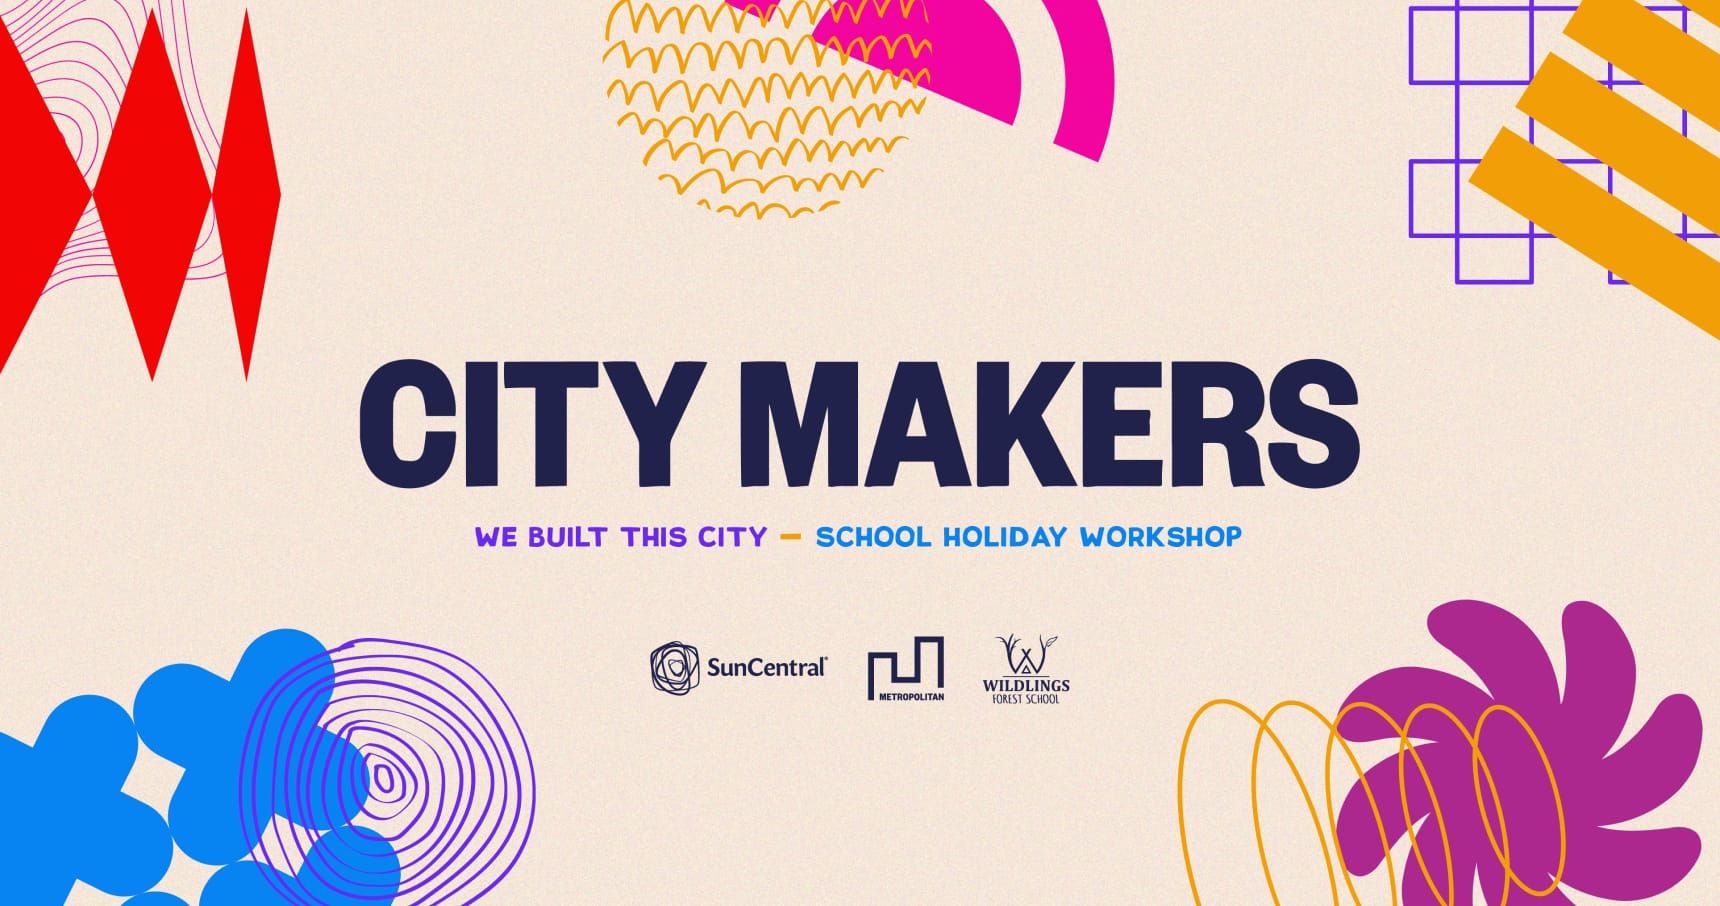 City Makers feature image